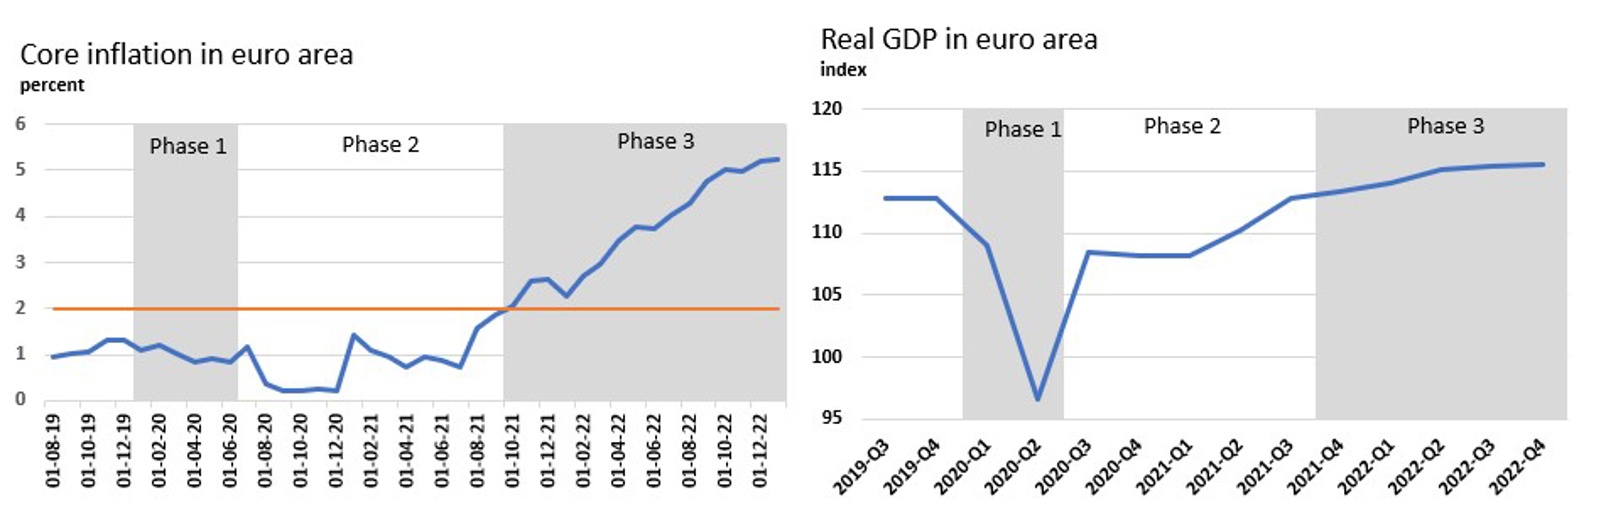 Figure 1. Core inflation and GDP trend in the euro area